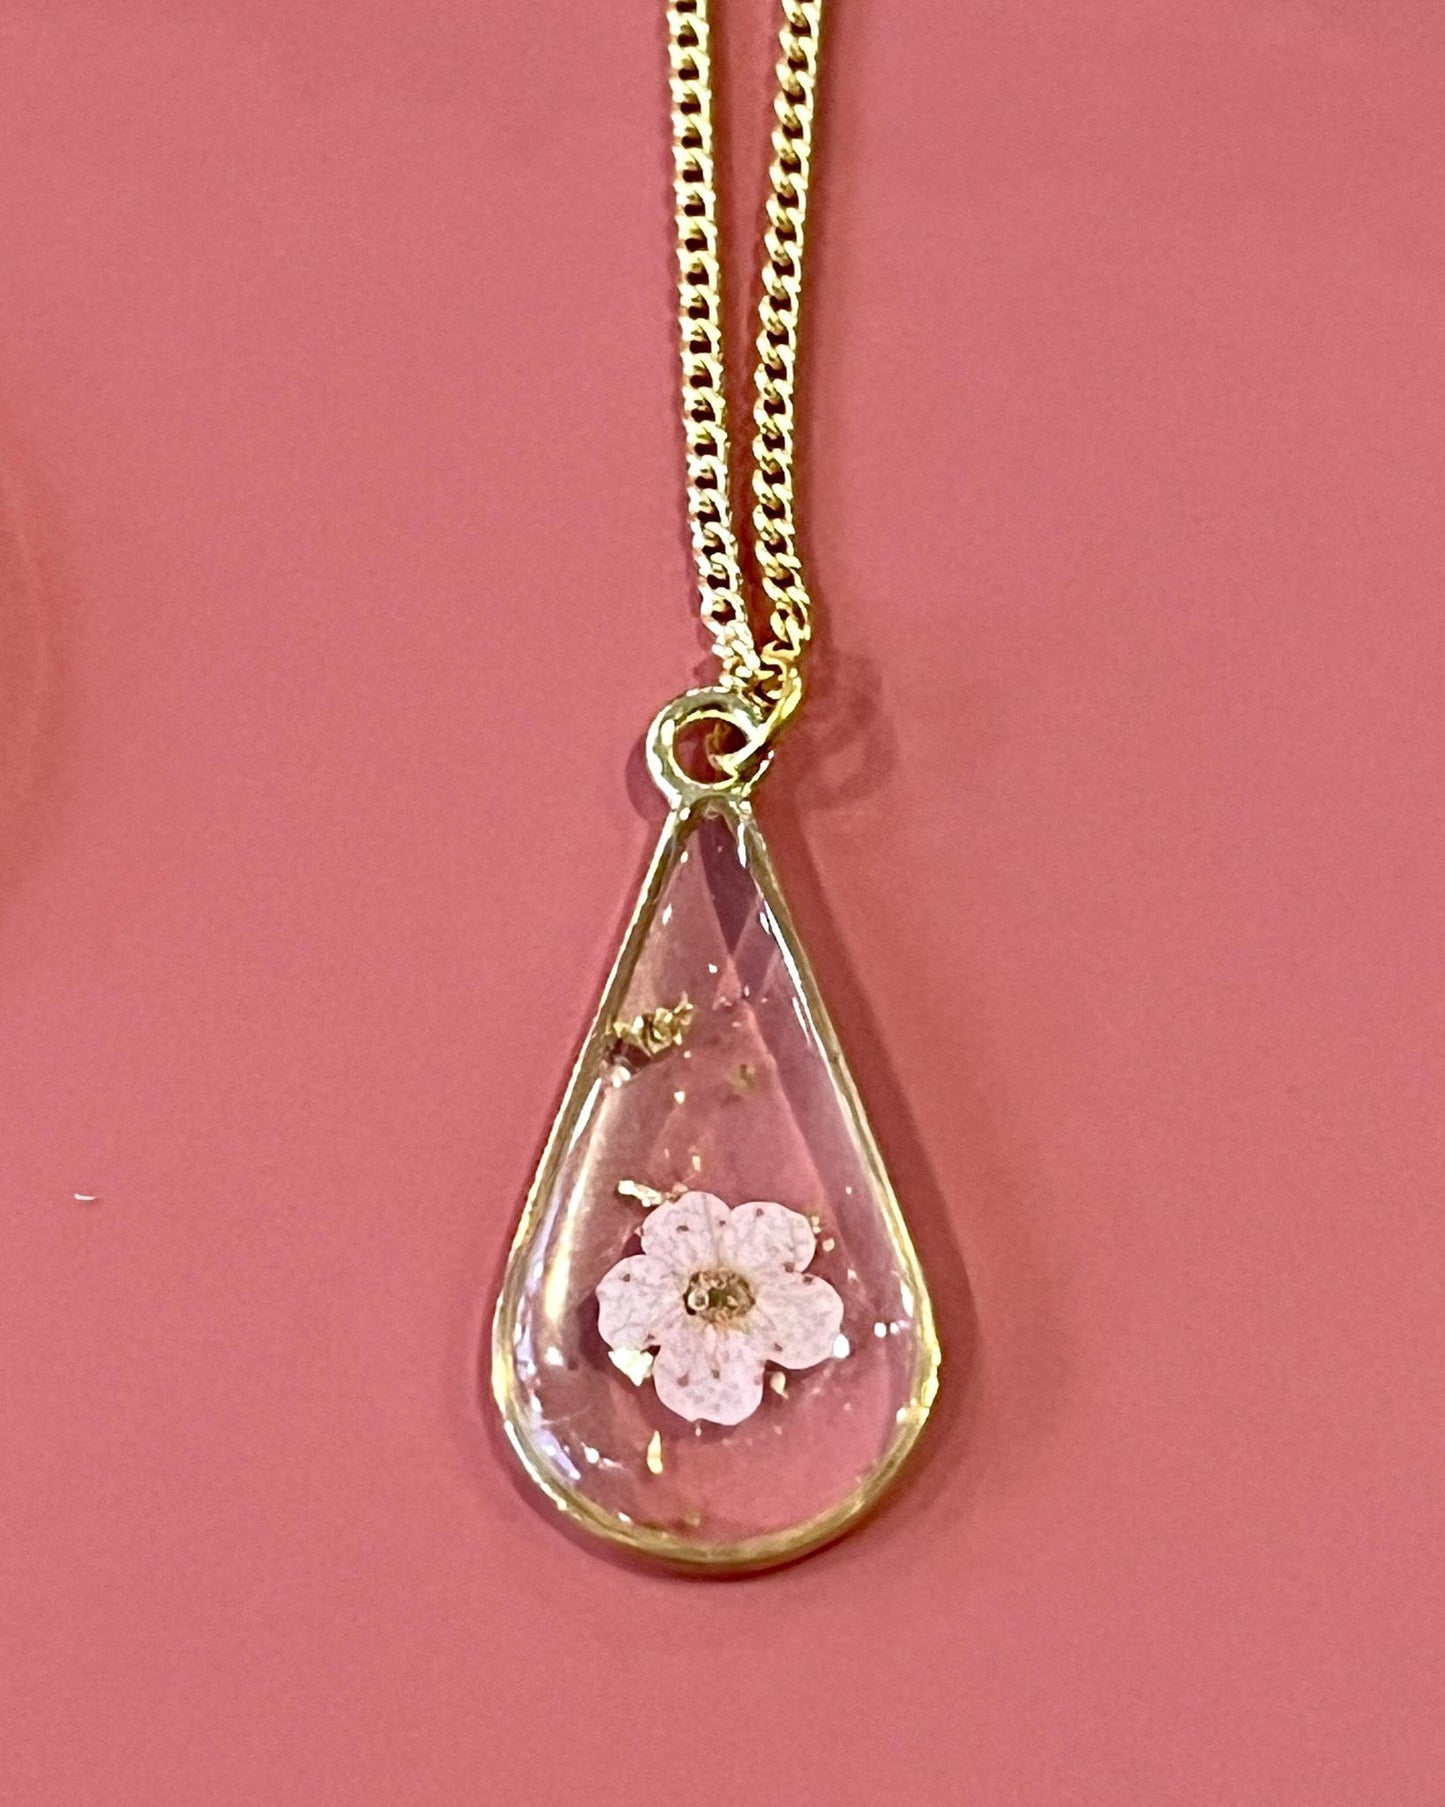 Pajaro Negro 18K Gold Fill Teardrop Pendant Necklace with Tiny Pink Flower